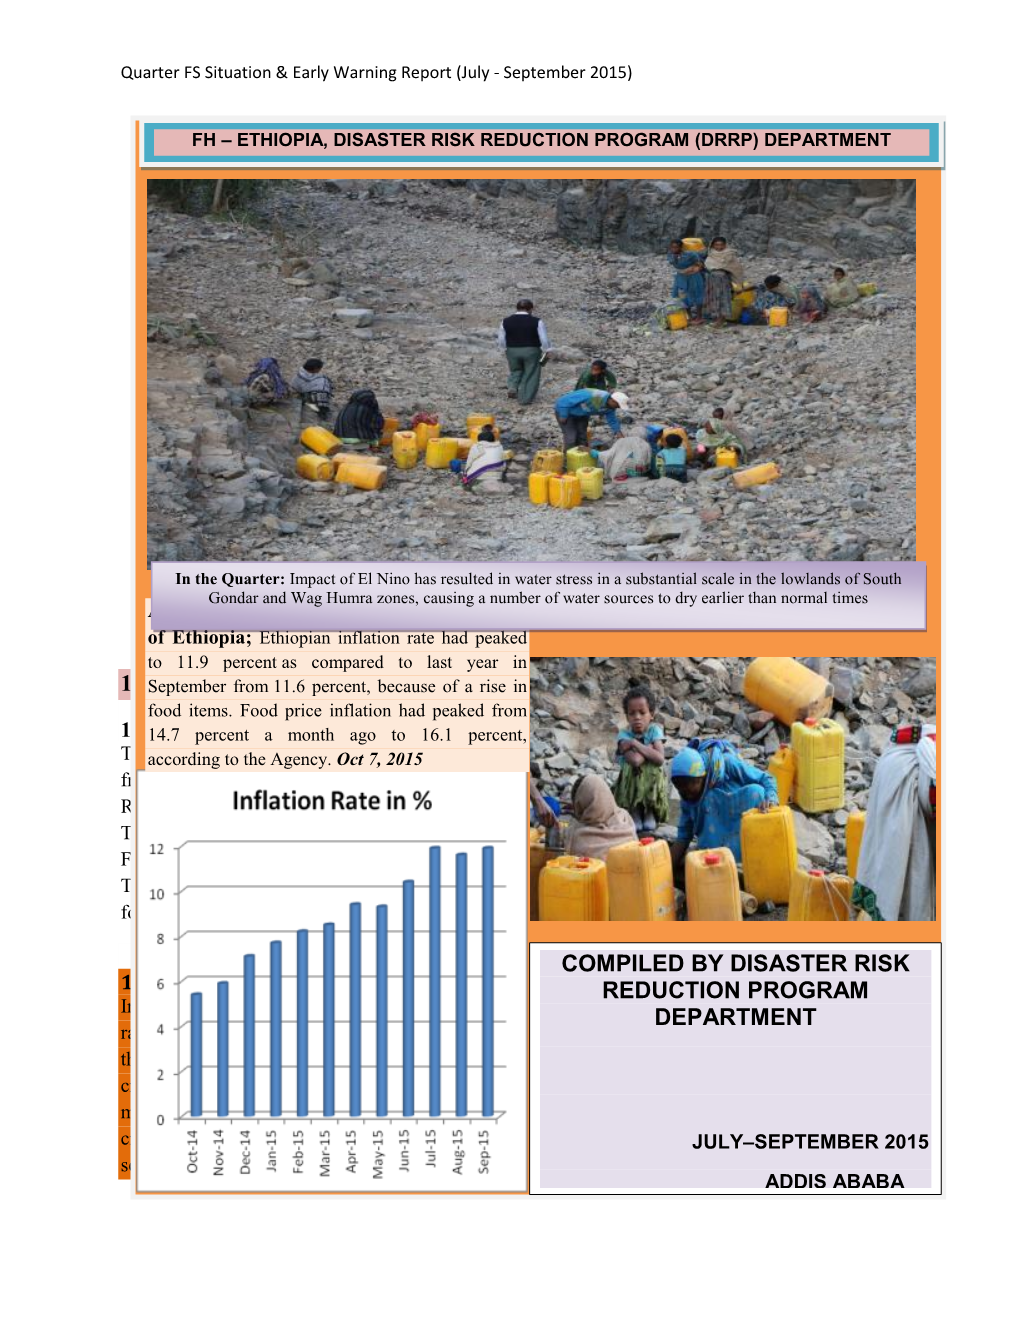 1. Summary COMPILED by DISASTER RISK REDUCTION PROGRAM DEPARTMENT